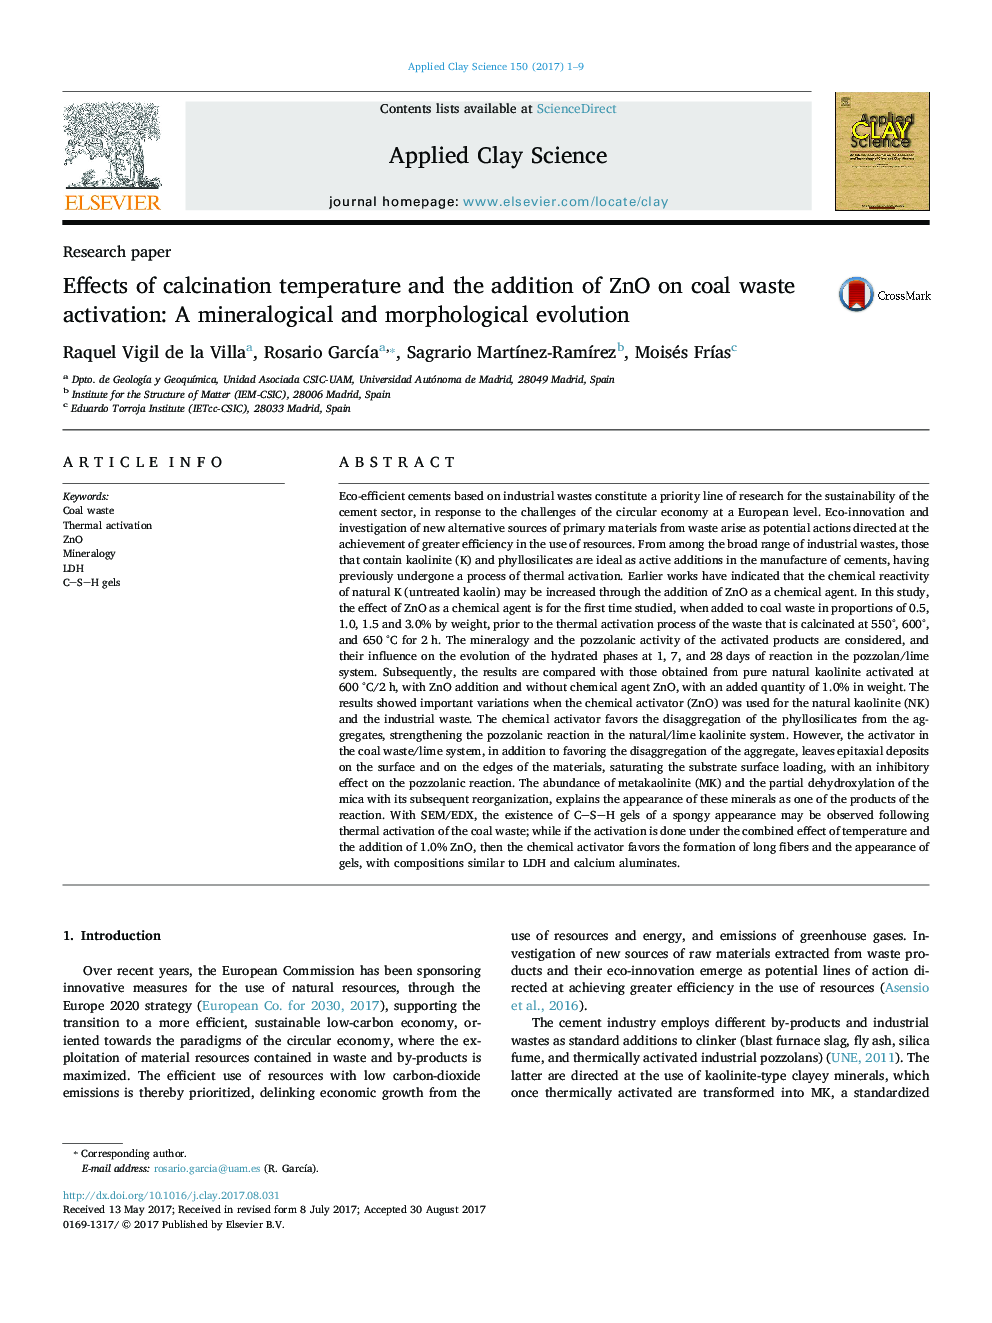 Effects of calcination temperature and the addition of ZnO on coal waste activation: A mineralogical and morphological evolution